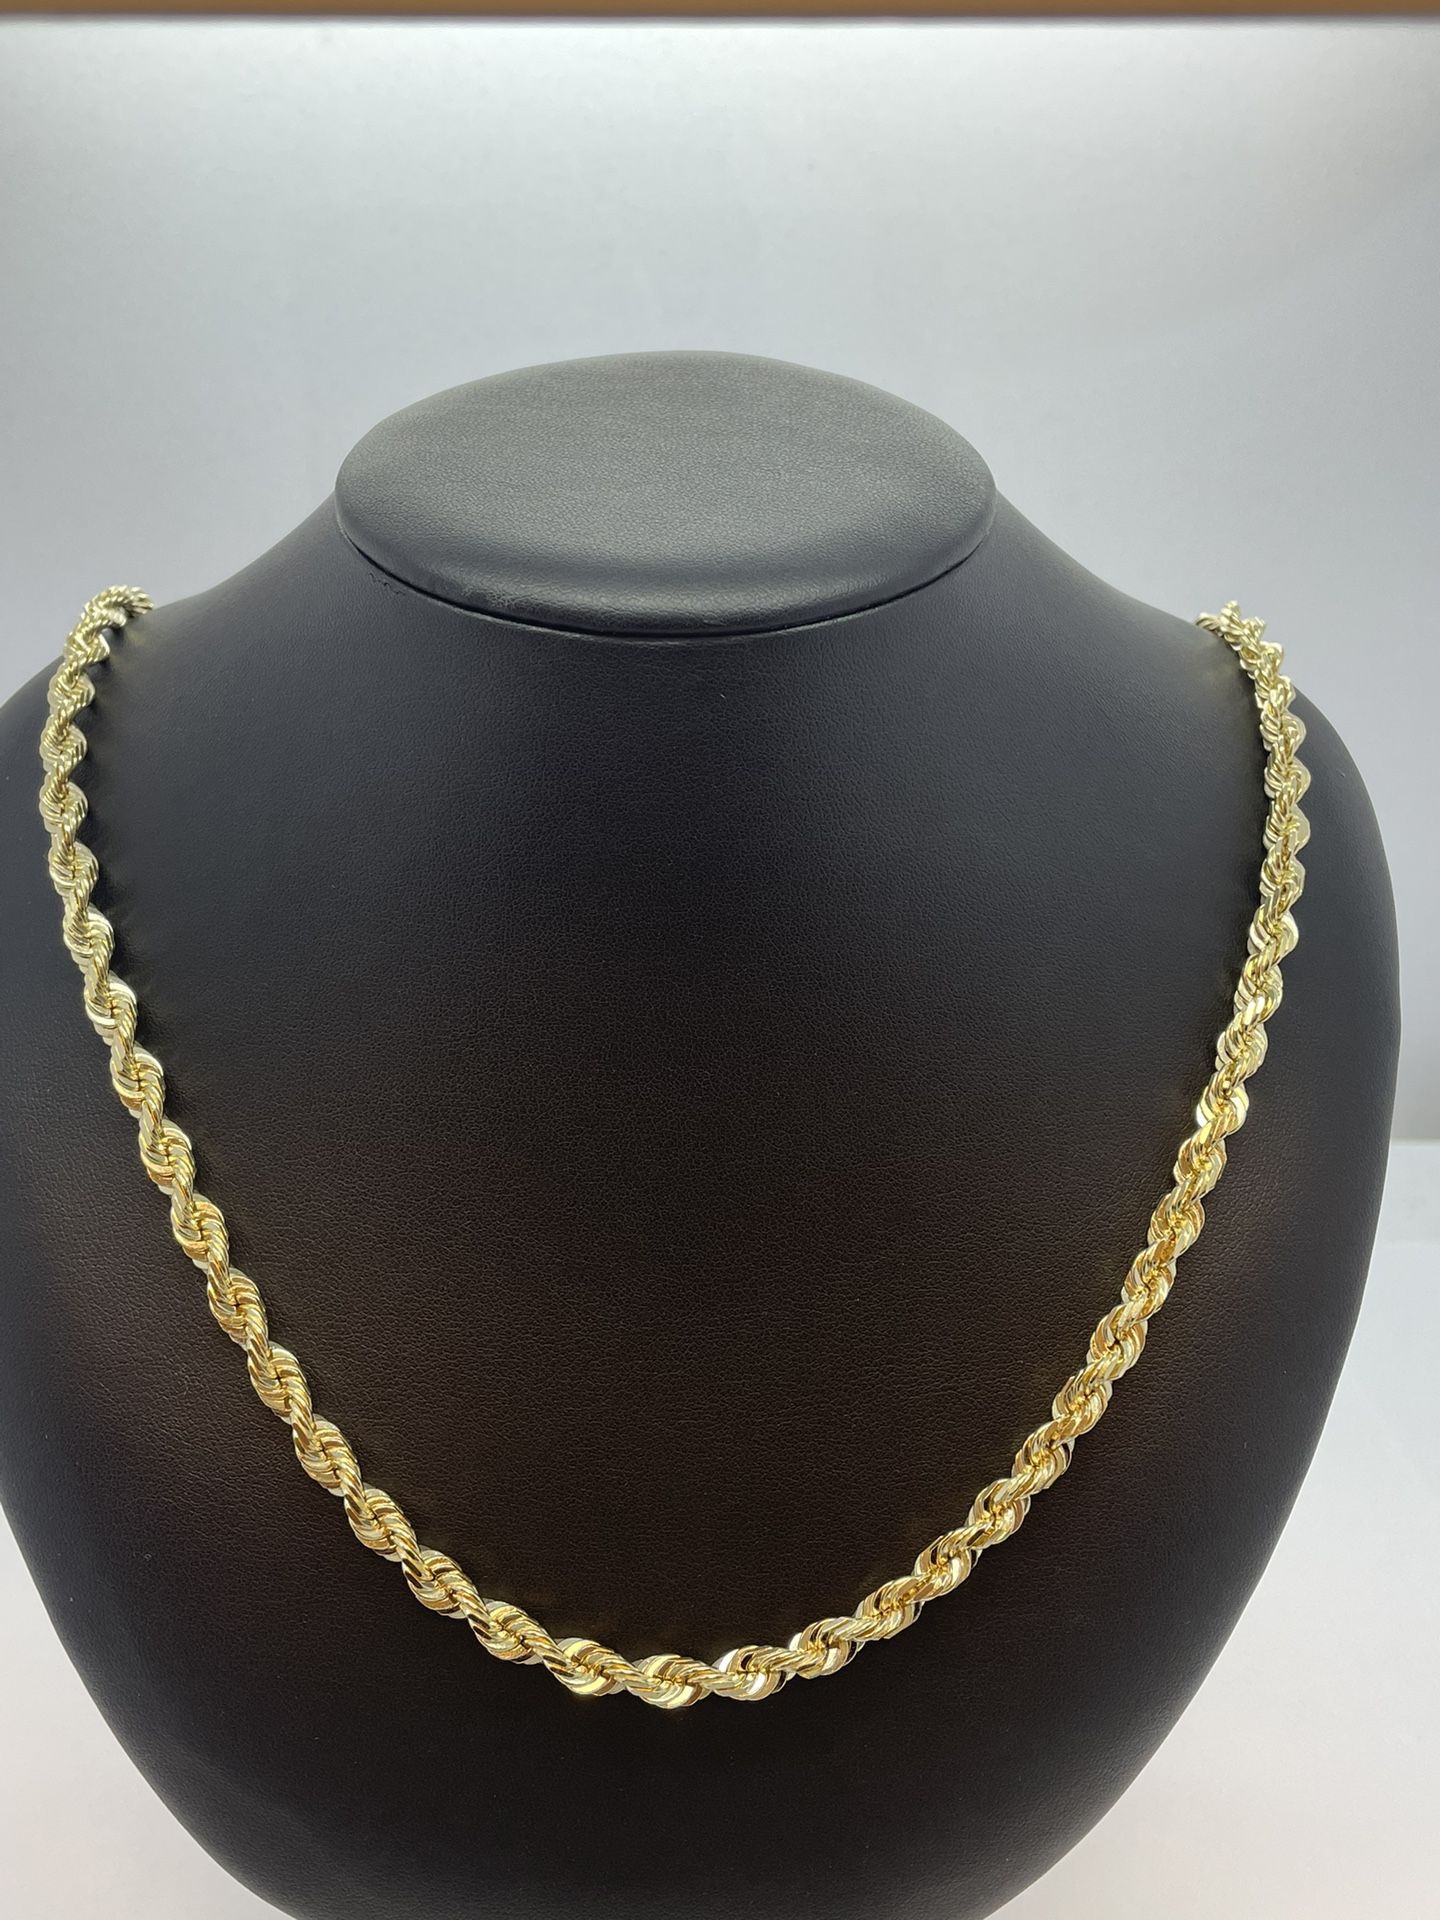 14k Gold Rope Chain. New